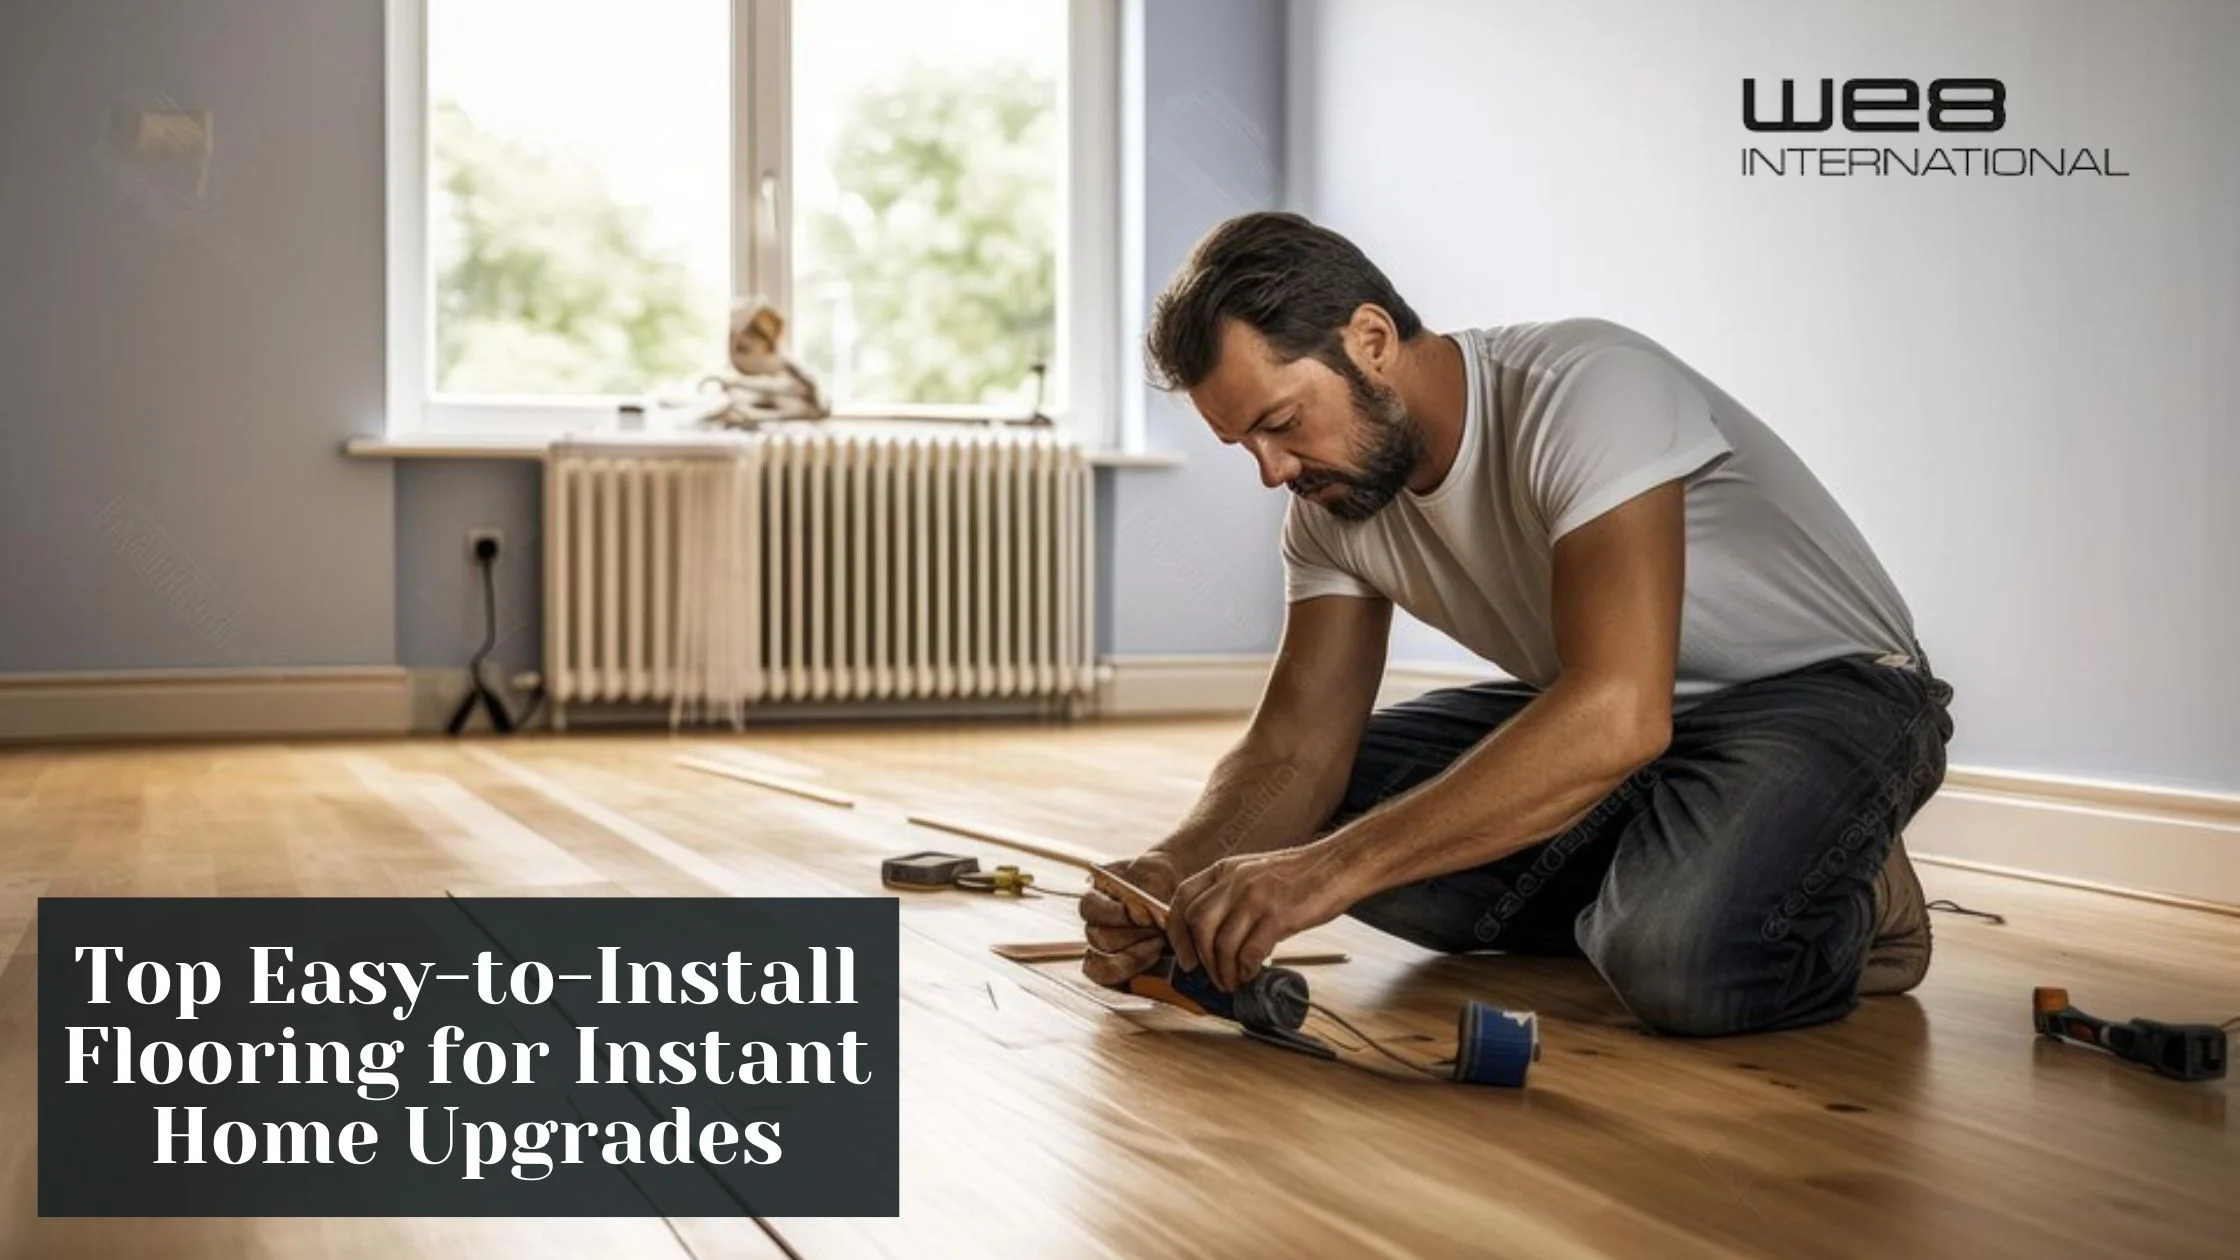 Top Easy-to-Install Flooring for Instant Home Upgrades